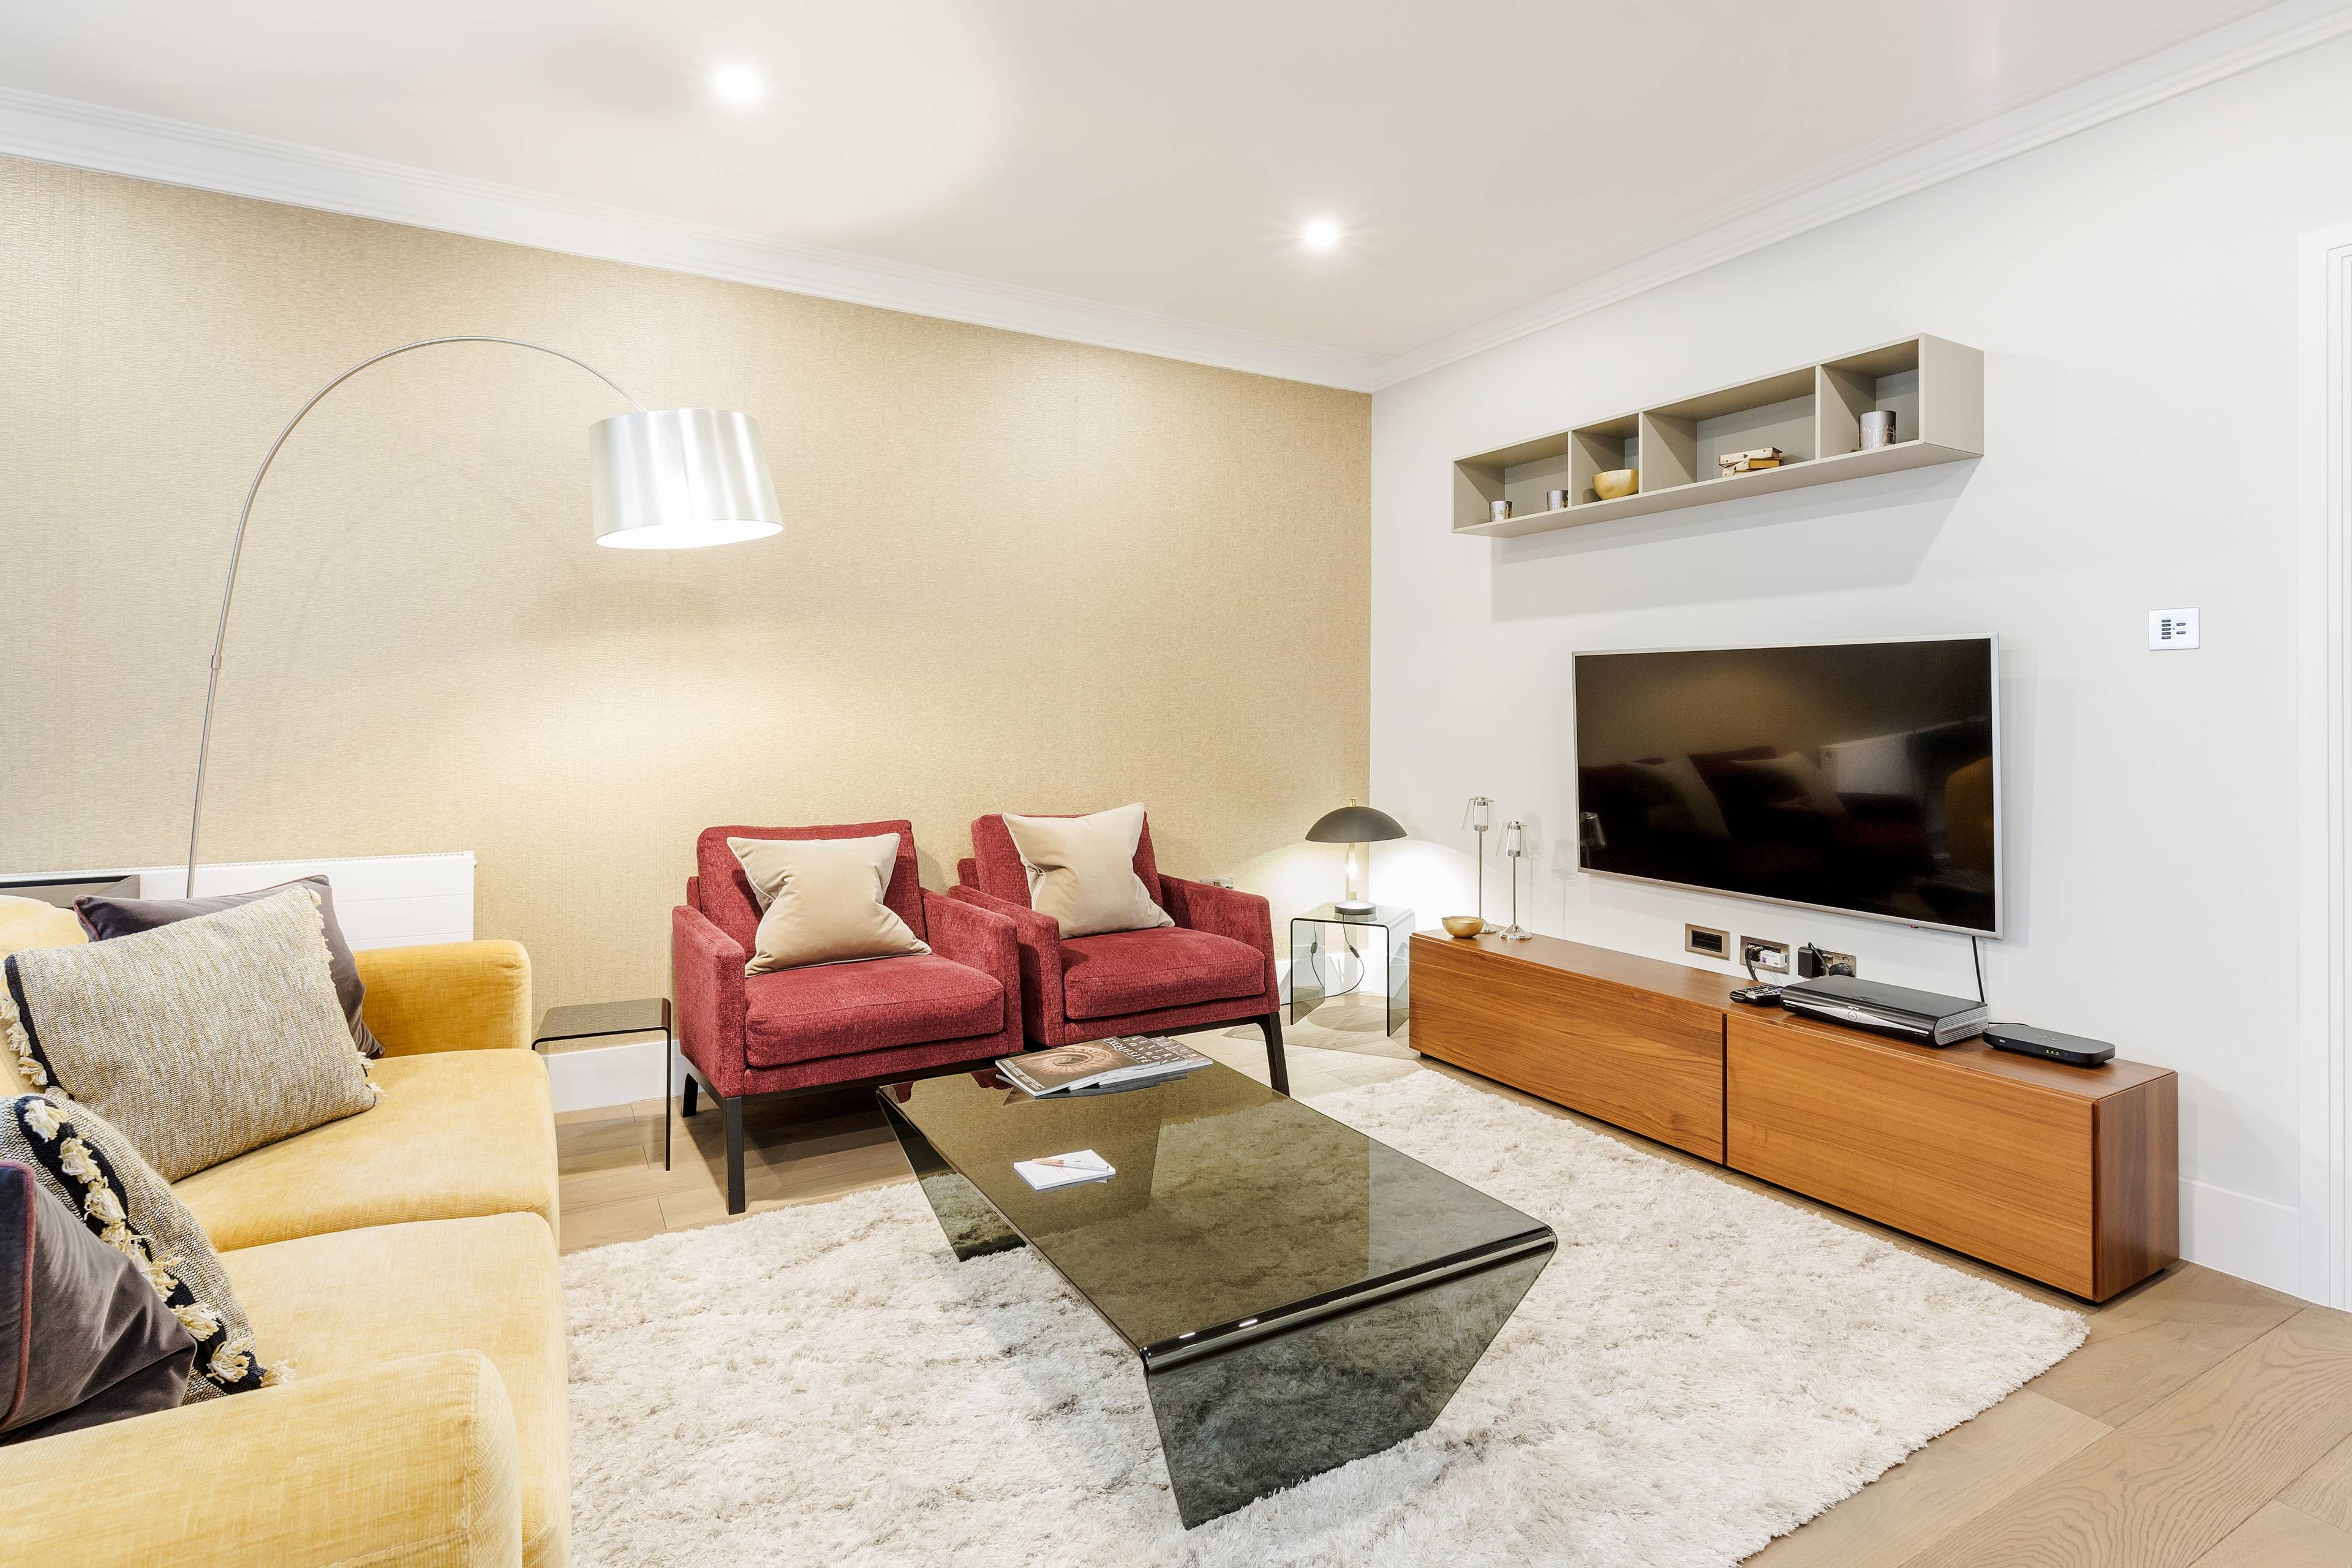 A modern 1 bedroom apartment tucked away on a quiet street in Mayfair. Situated on the first floor, the apartment has been newly refurbished and furnished to the highest of standards.